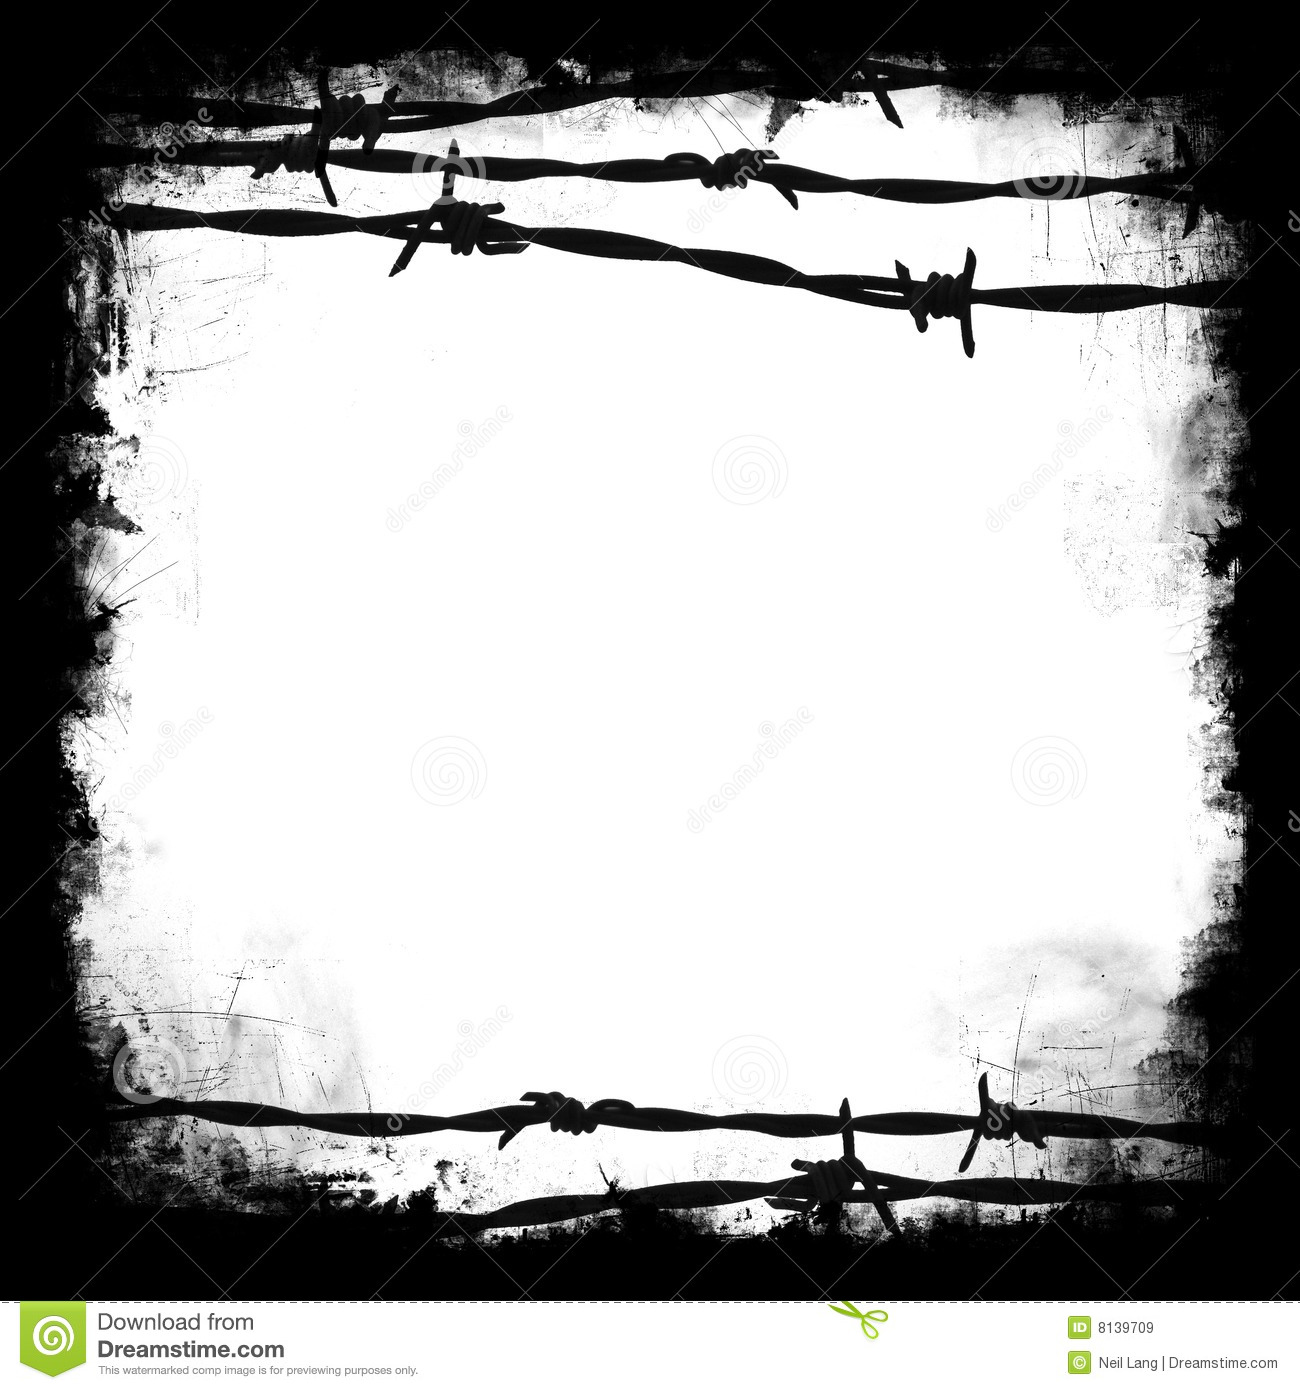 barbed wire as a border